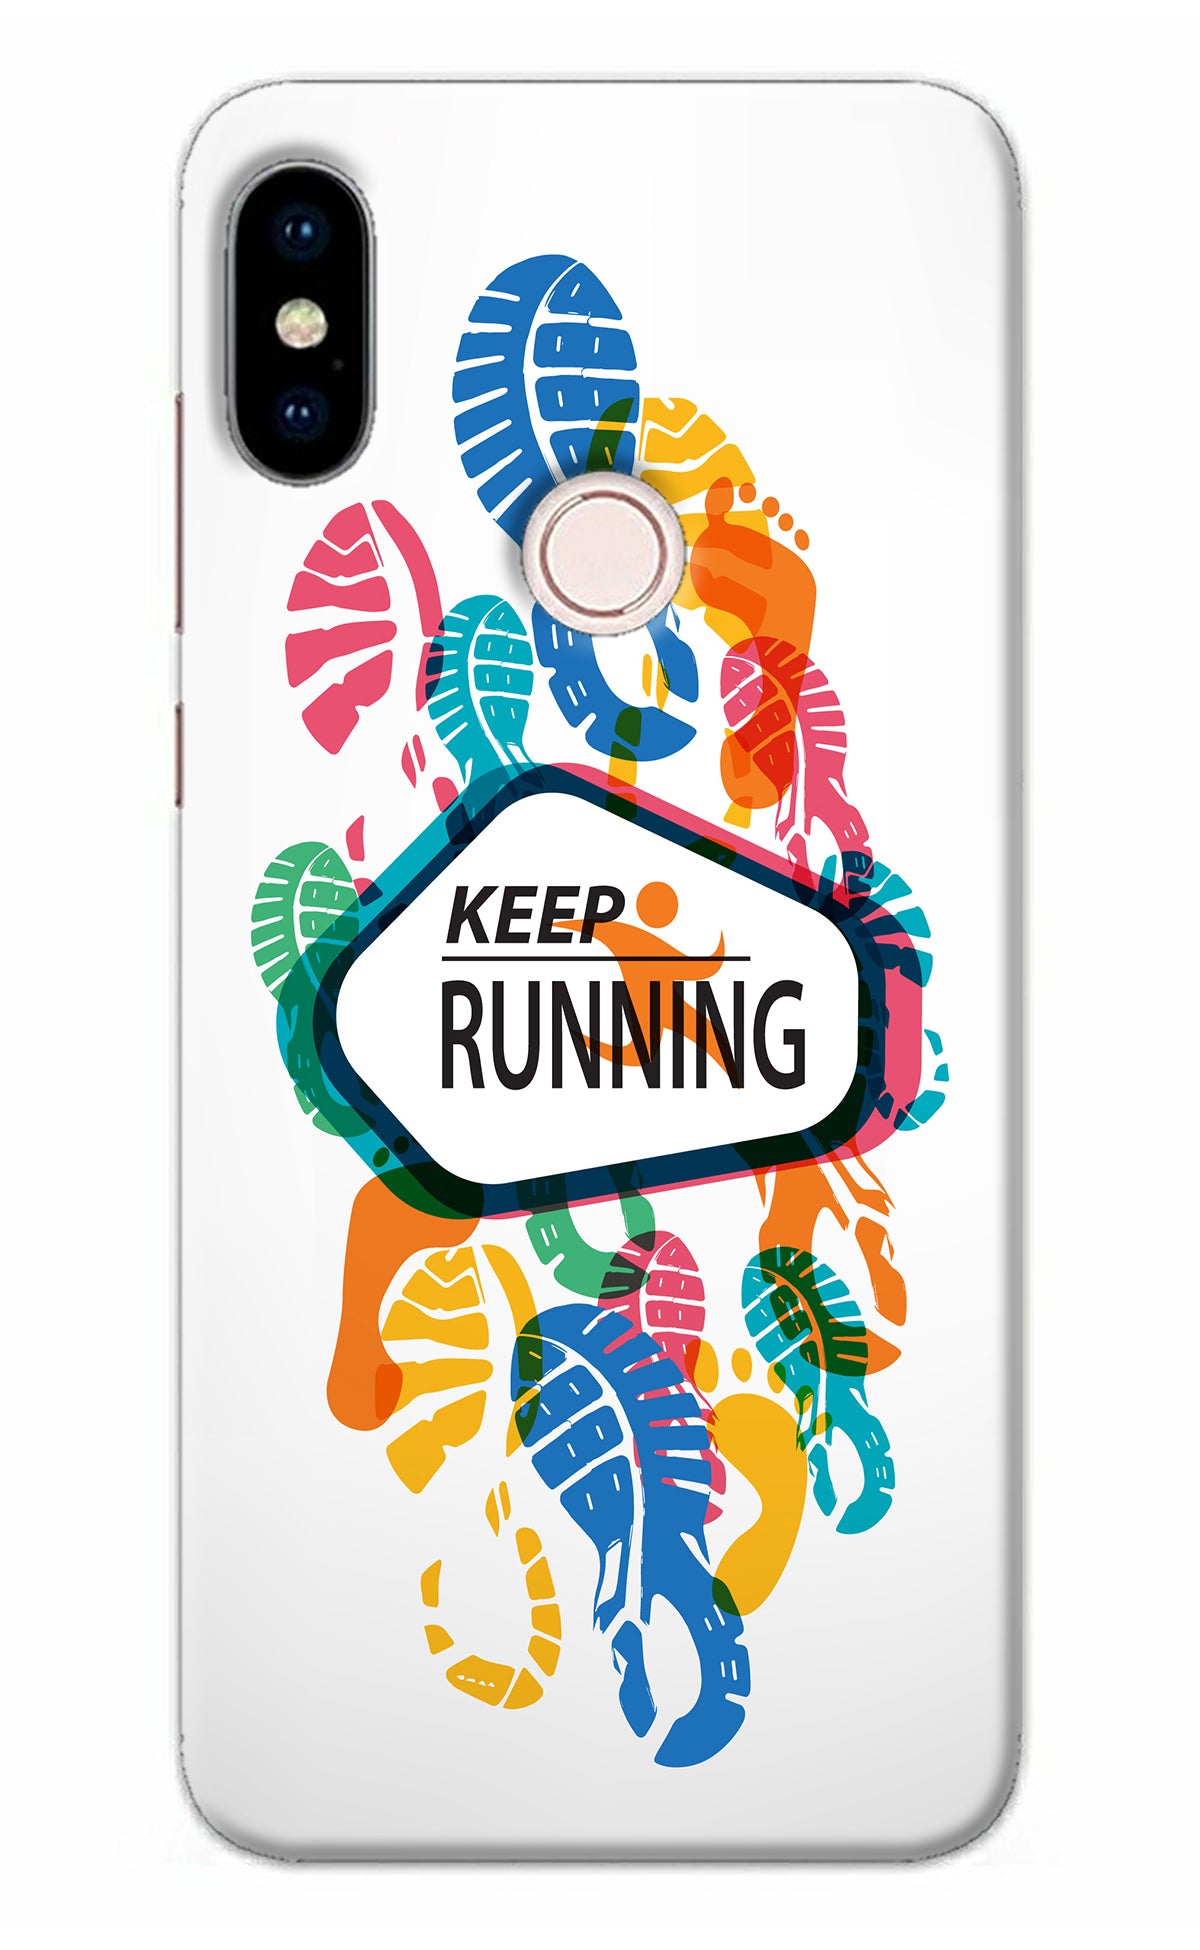 Keep Running Redmi Note 5 Pro Back Cover